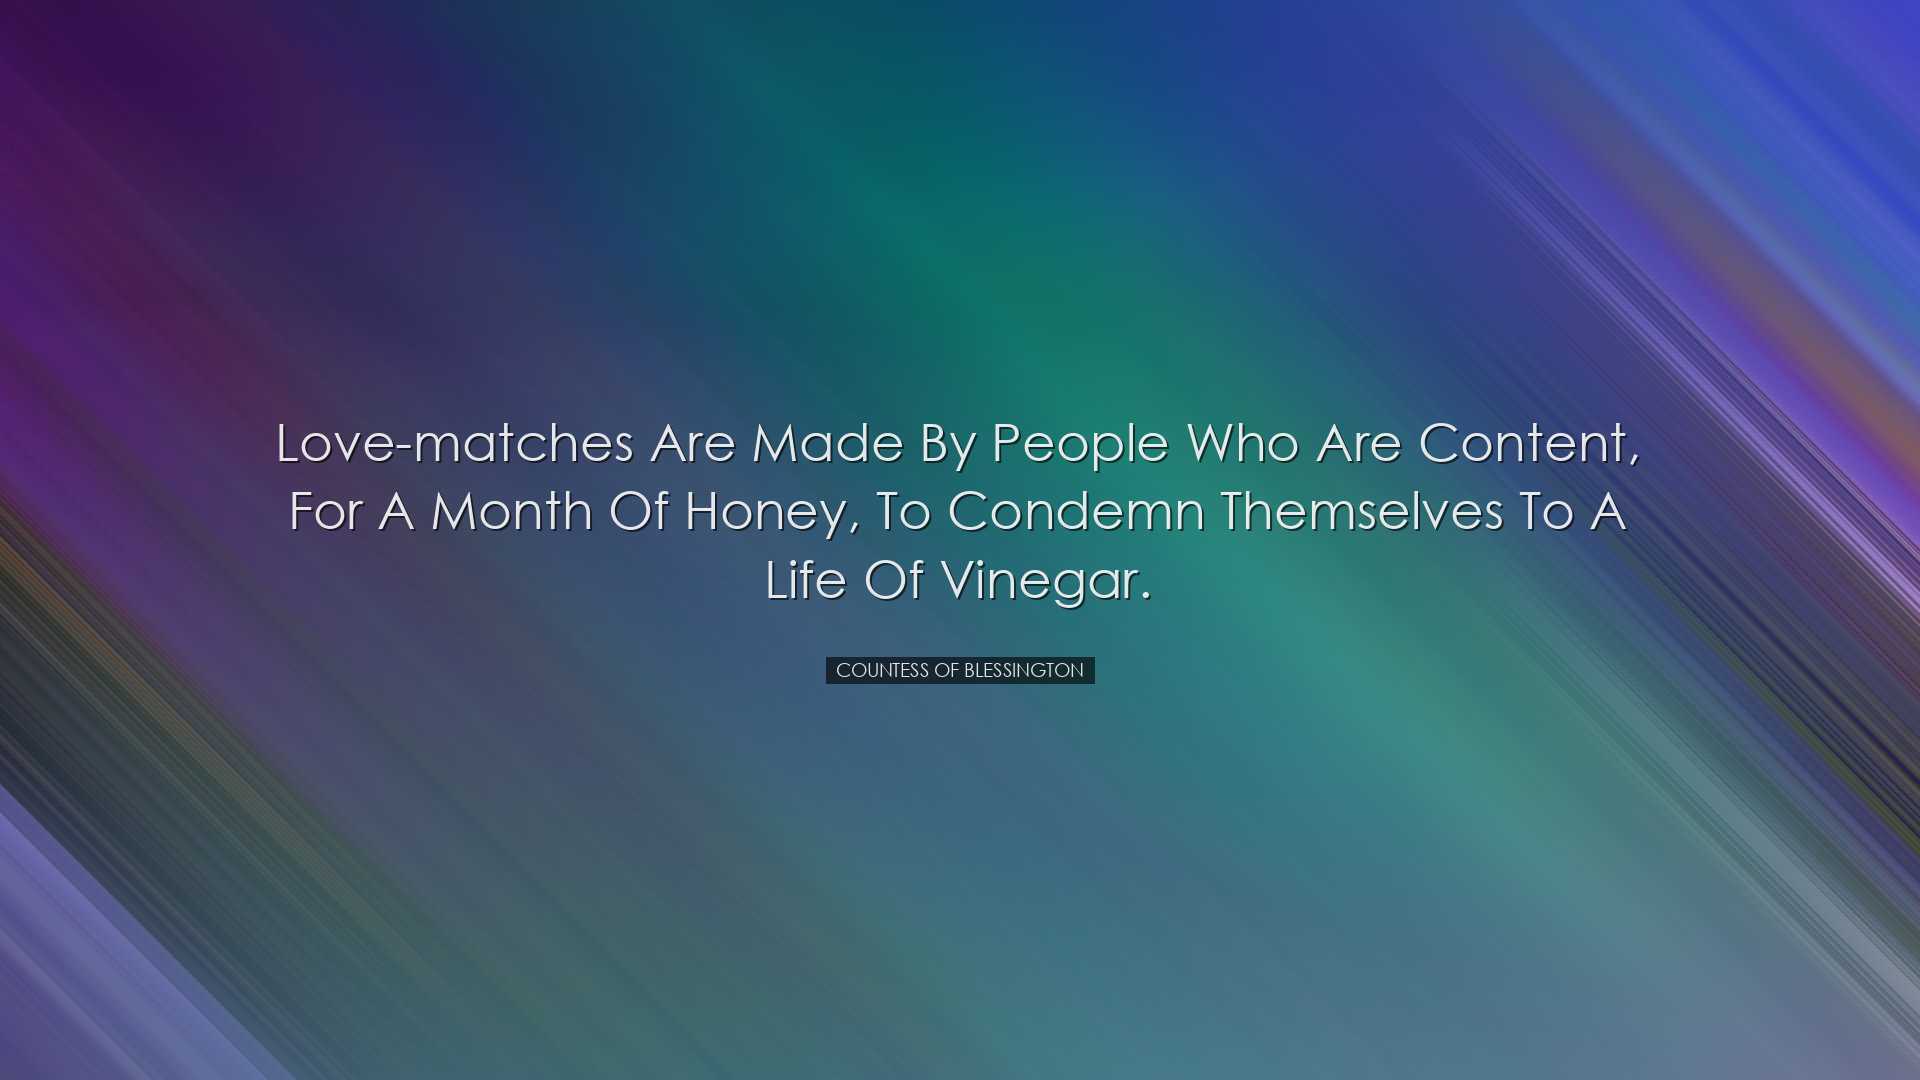 Love-matches are made by people who are content, for a month of ho